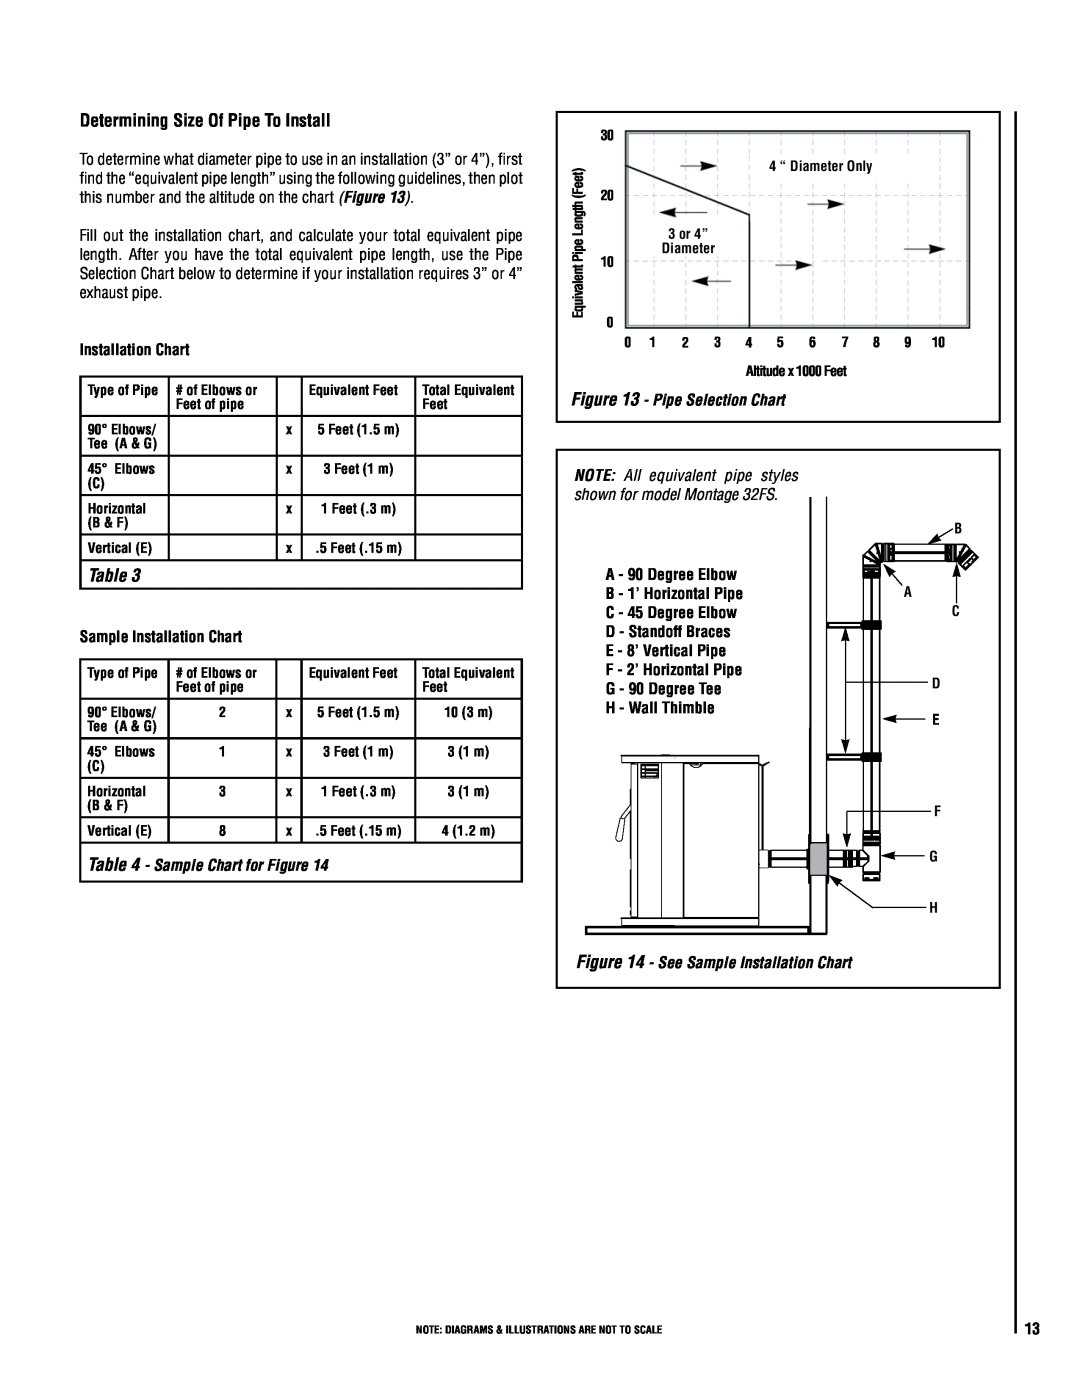 Lennox Hearth 32FS Determining Size Of Pipe To Install, Sample Installation Chart, Sample Chart for Figure 